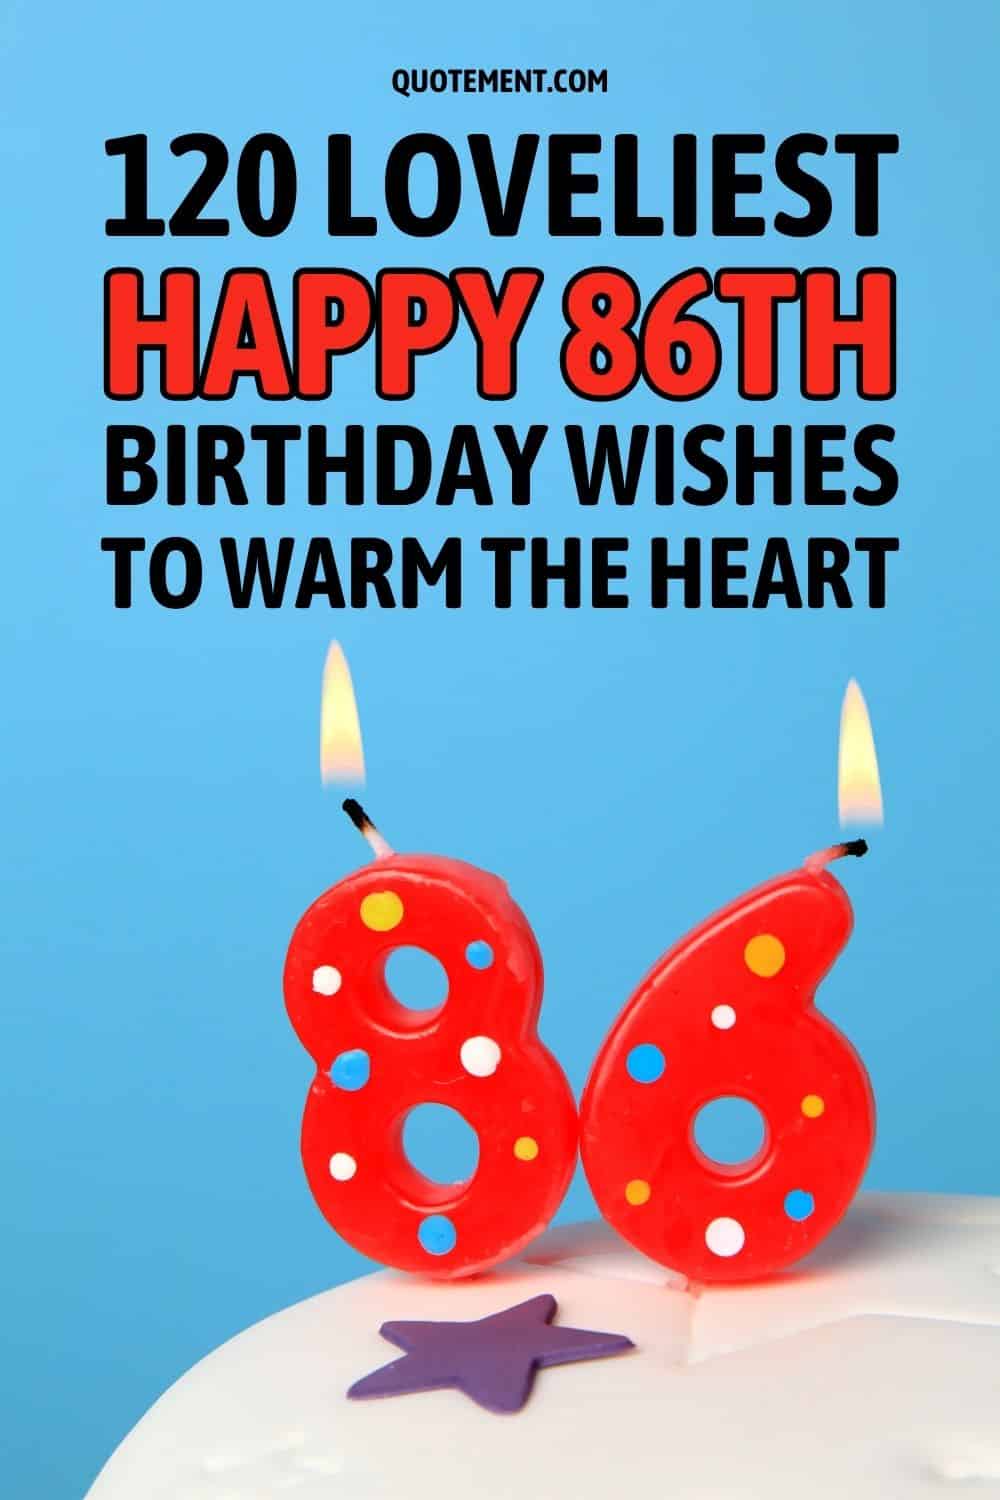 120 Loveliest Happy 86th Birthday Wishes To Warm The Heart
